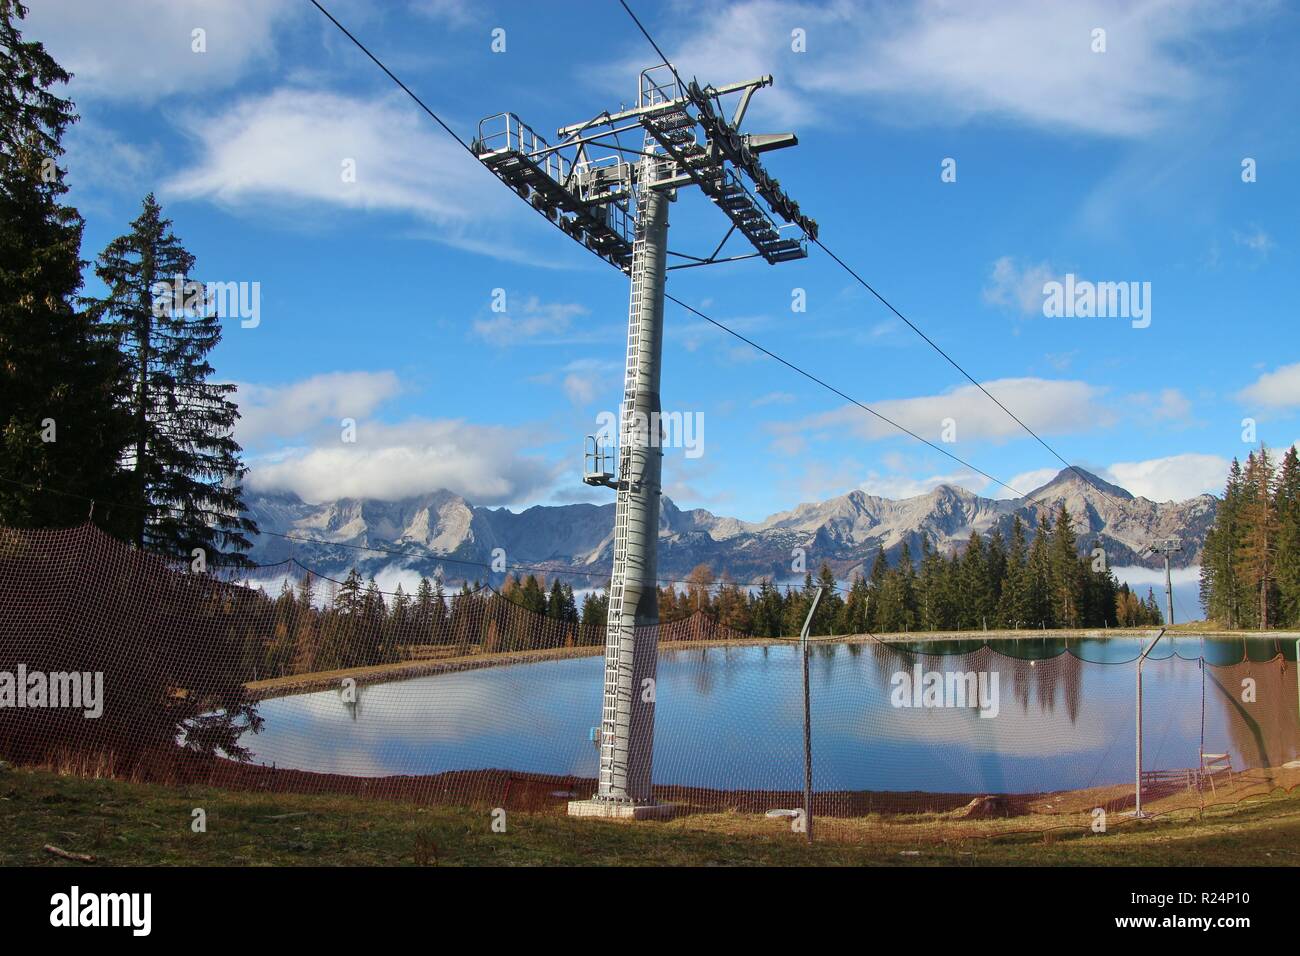 View of a reservoir lake for artificial snow, ski lift and surrounding mountains, in autumn. Height 1300 m. Hinterstoder, Upper Austria, Europe. Stock Photo